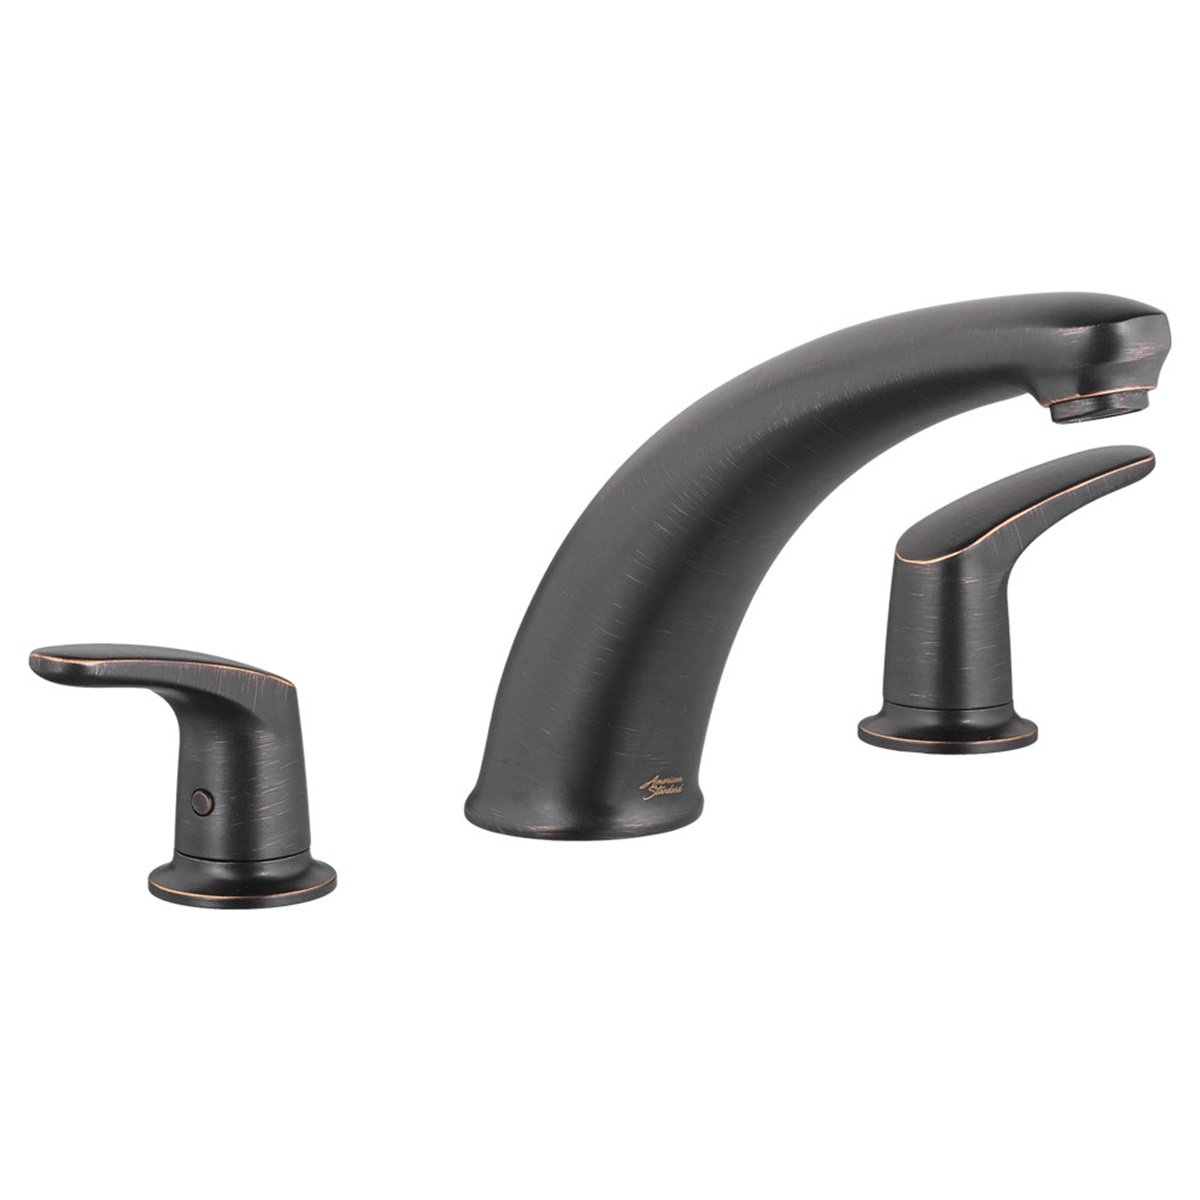 T075.900.278 COLONY PRO DECK
MOUNT TUB FILLER LEGACY
BRONZE A/S